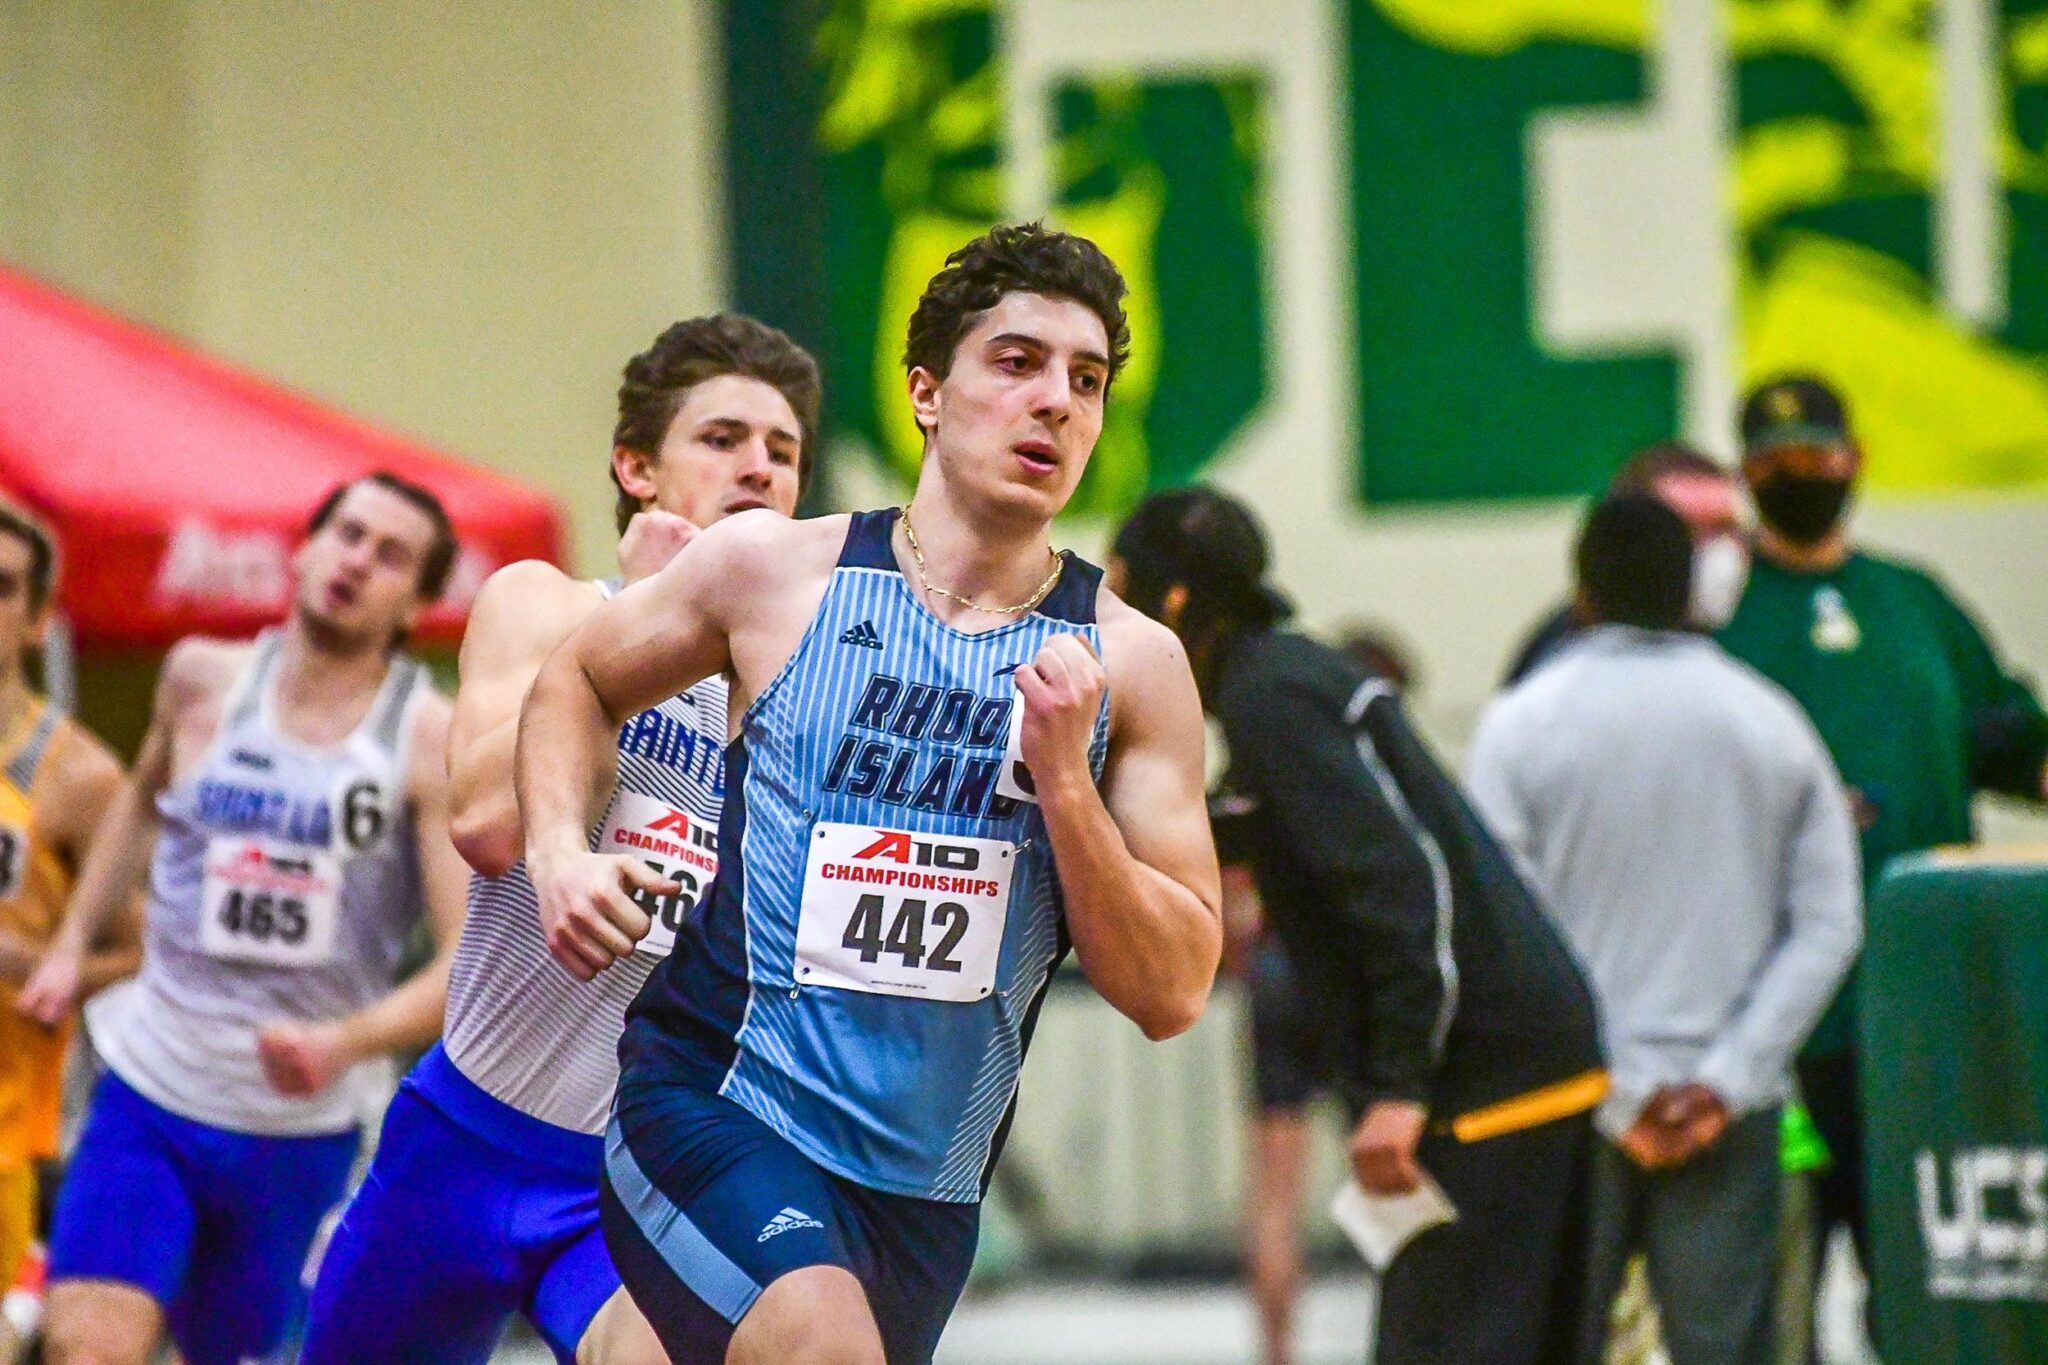 Men’s indoor track opens season with secondplace finish The Good 5